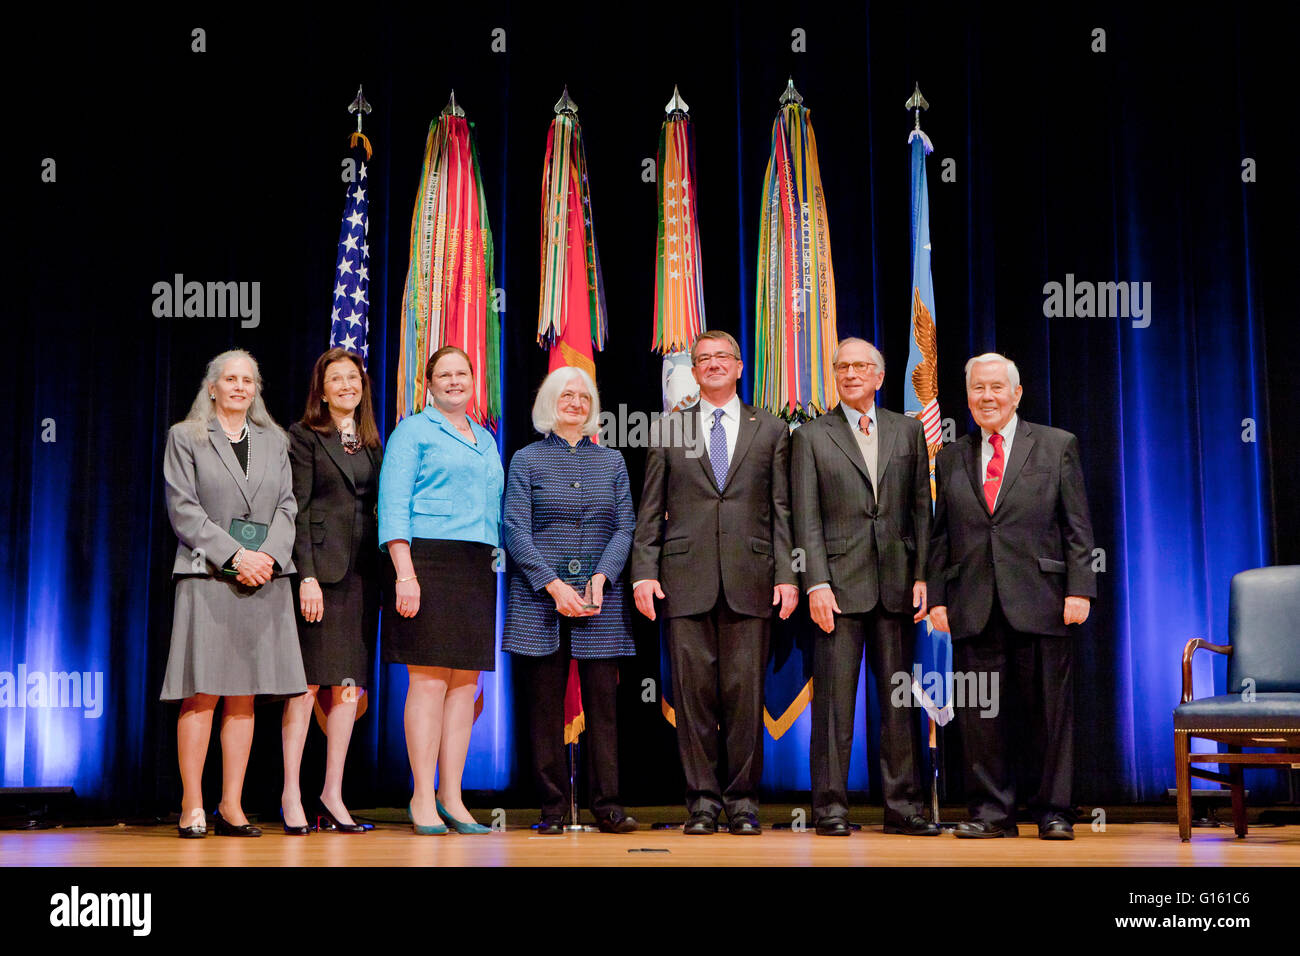 Washington, DC USA, 9th May, 2016: US Department of Defense Ash Carter provides remarks at  a ceremony commemorating the 25th Anniversary of the Nunn-Lugar Cooperative Threat Reduction Program, and presented awards to recipients of the inaugural Department of Defense Nunn-Lugar Trailblazer award.  Senator Sam Nunn and Senator Richard Lugar participate in the awards and discussion. Credit:  B Christopher/Alamy Live News Stock Photo